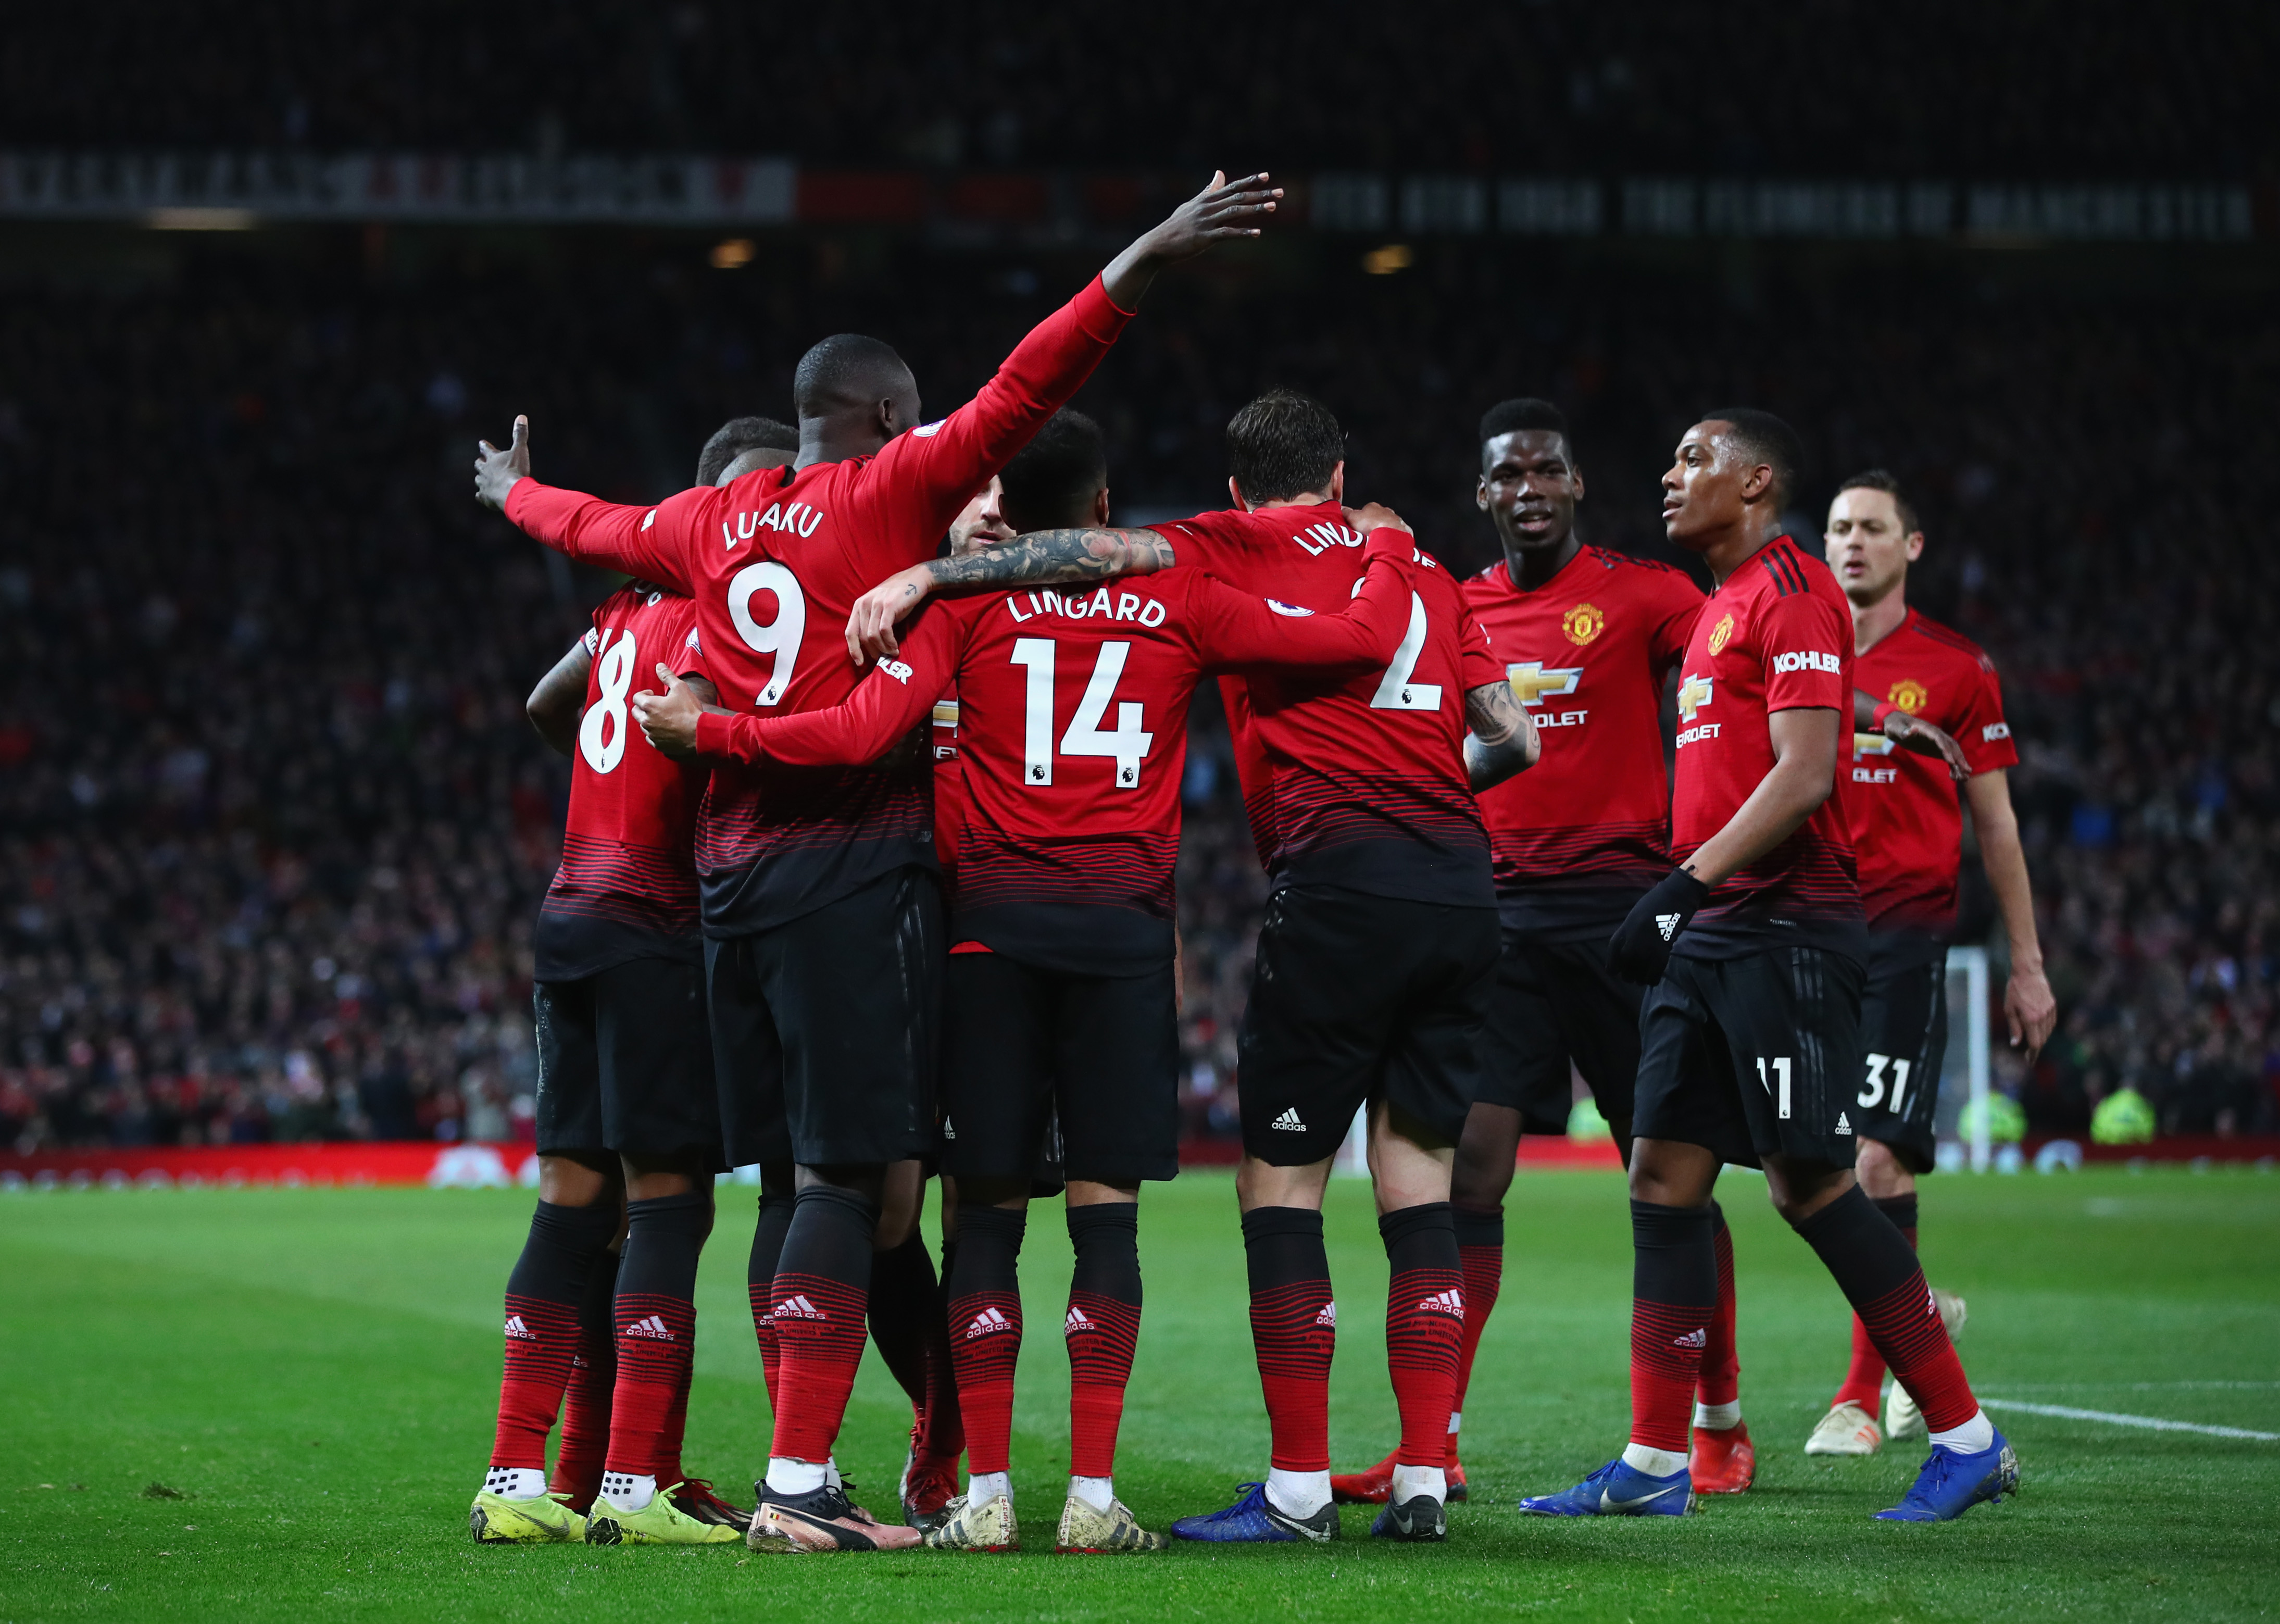 MANCHESTER, ENGLAND - DECEMBER 30:  Romelu Lukaku of Manchester United celebrates after scoring his team's fourth goal with team mates during the Premier League match between Manchester United and AFC Bournemouth at Old Trafford on December 30, 2018 in Manchester, United Kingdom.  (Photo by Clive Brunskill/Getty Images)